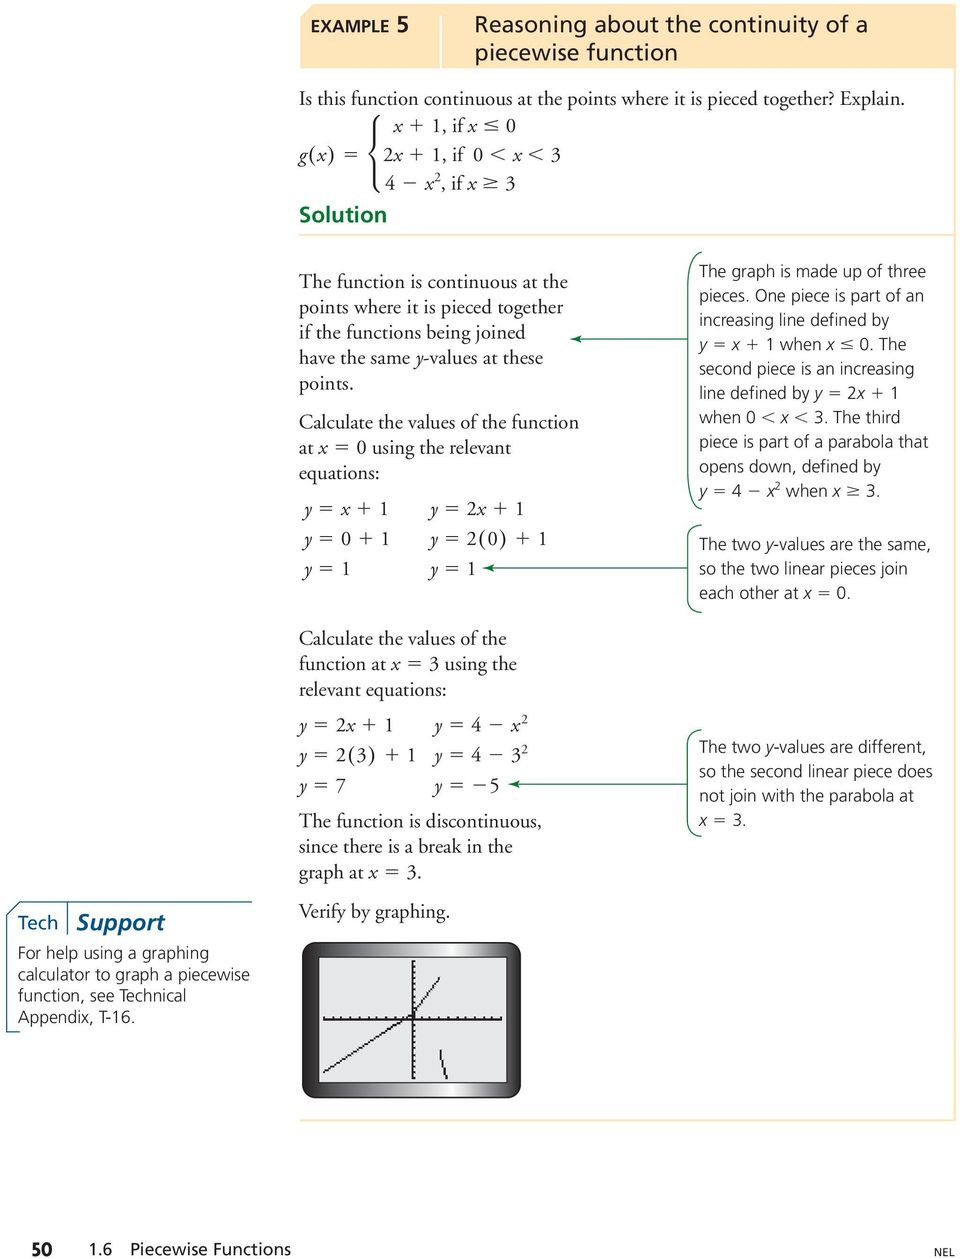 Evaluating Piecewise Functions Worksheet 1 6 Piecewise Functions Learn About the Math Representing